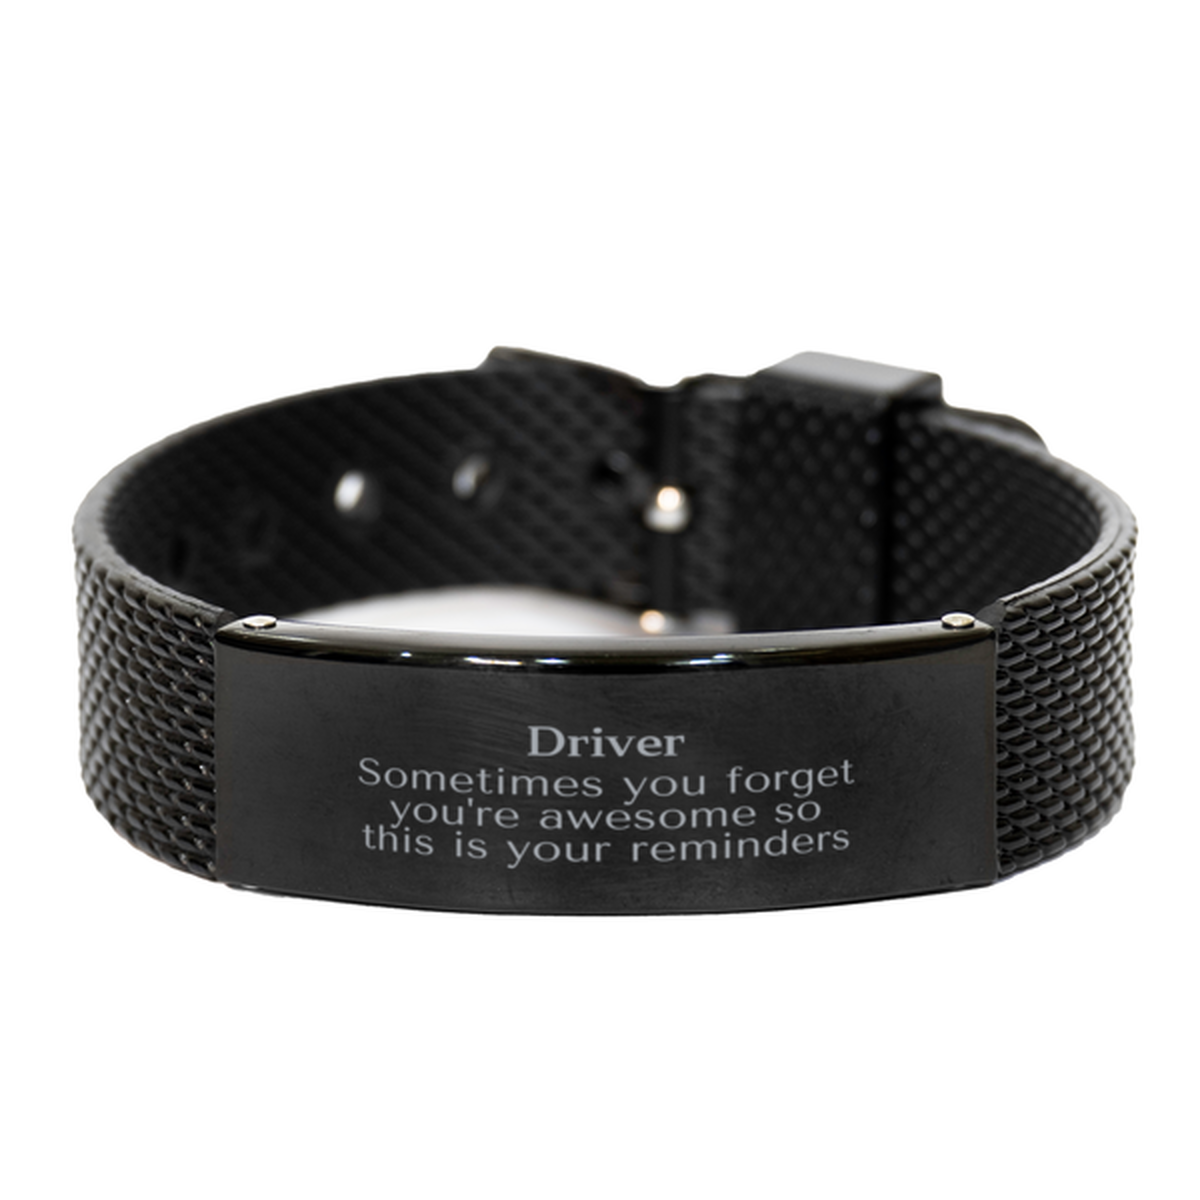 Sentimental Driver Black Shark Mesh Bracelet, Driver Sometimes you forget you're awesome so this is your reminders, Graduation Christmas Birthday Gifts for Driver, Men, Women, Coworkers